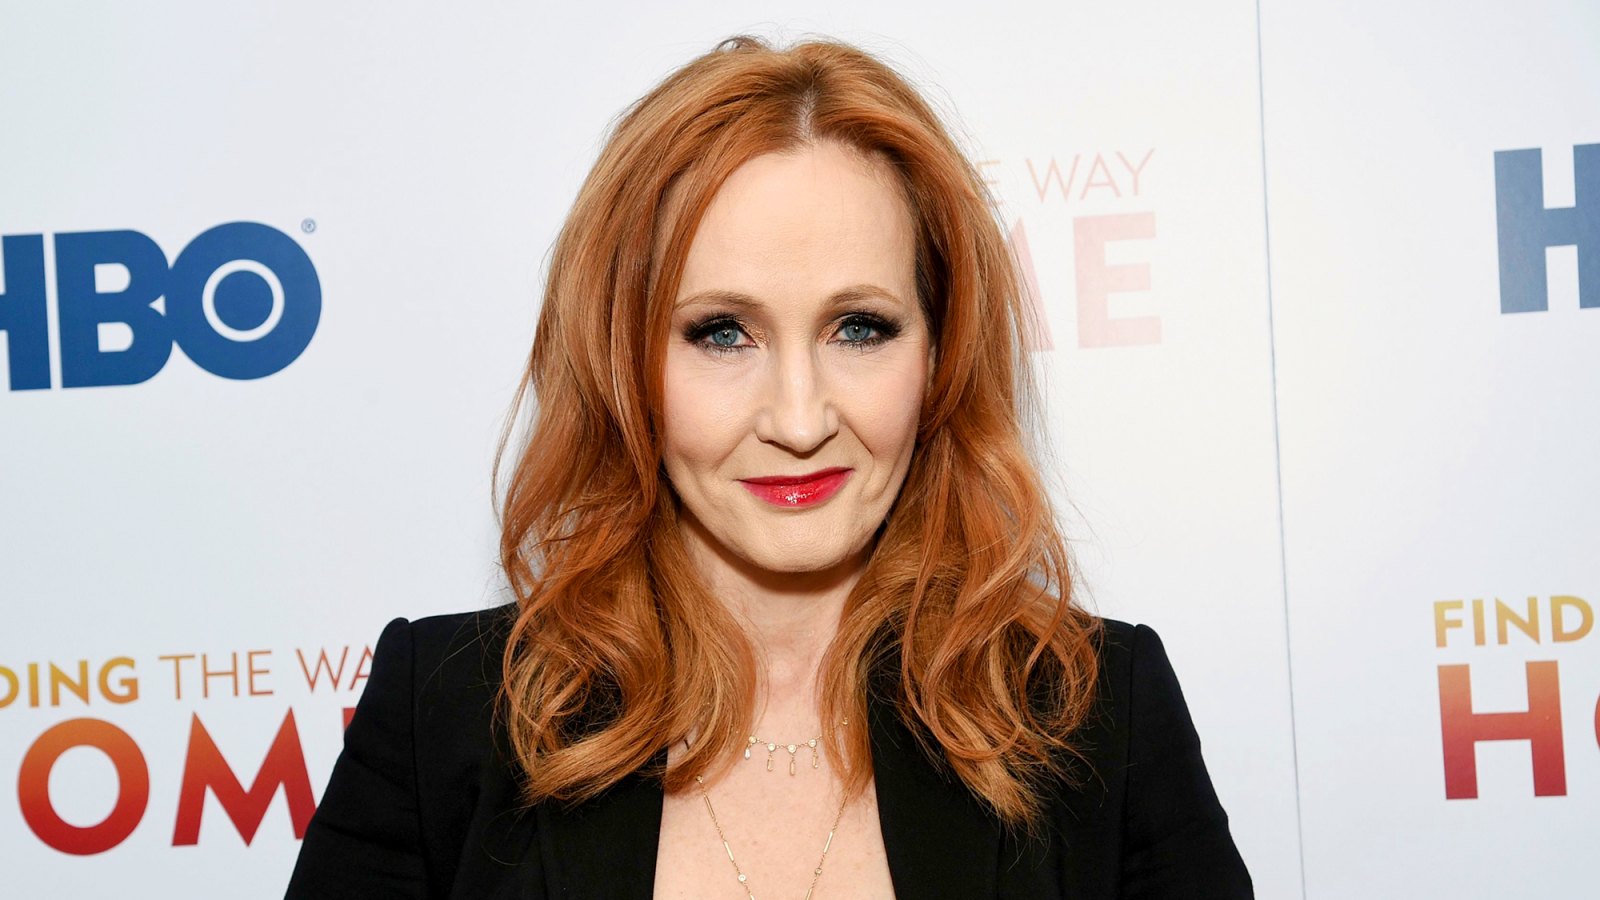 J.K.-Rowling-Comes-Under-Fire-After-Tweeting-Support-for-Transphobic-Researcher